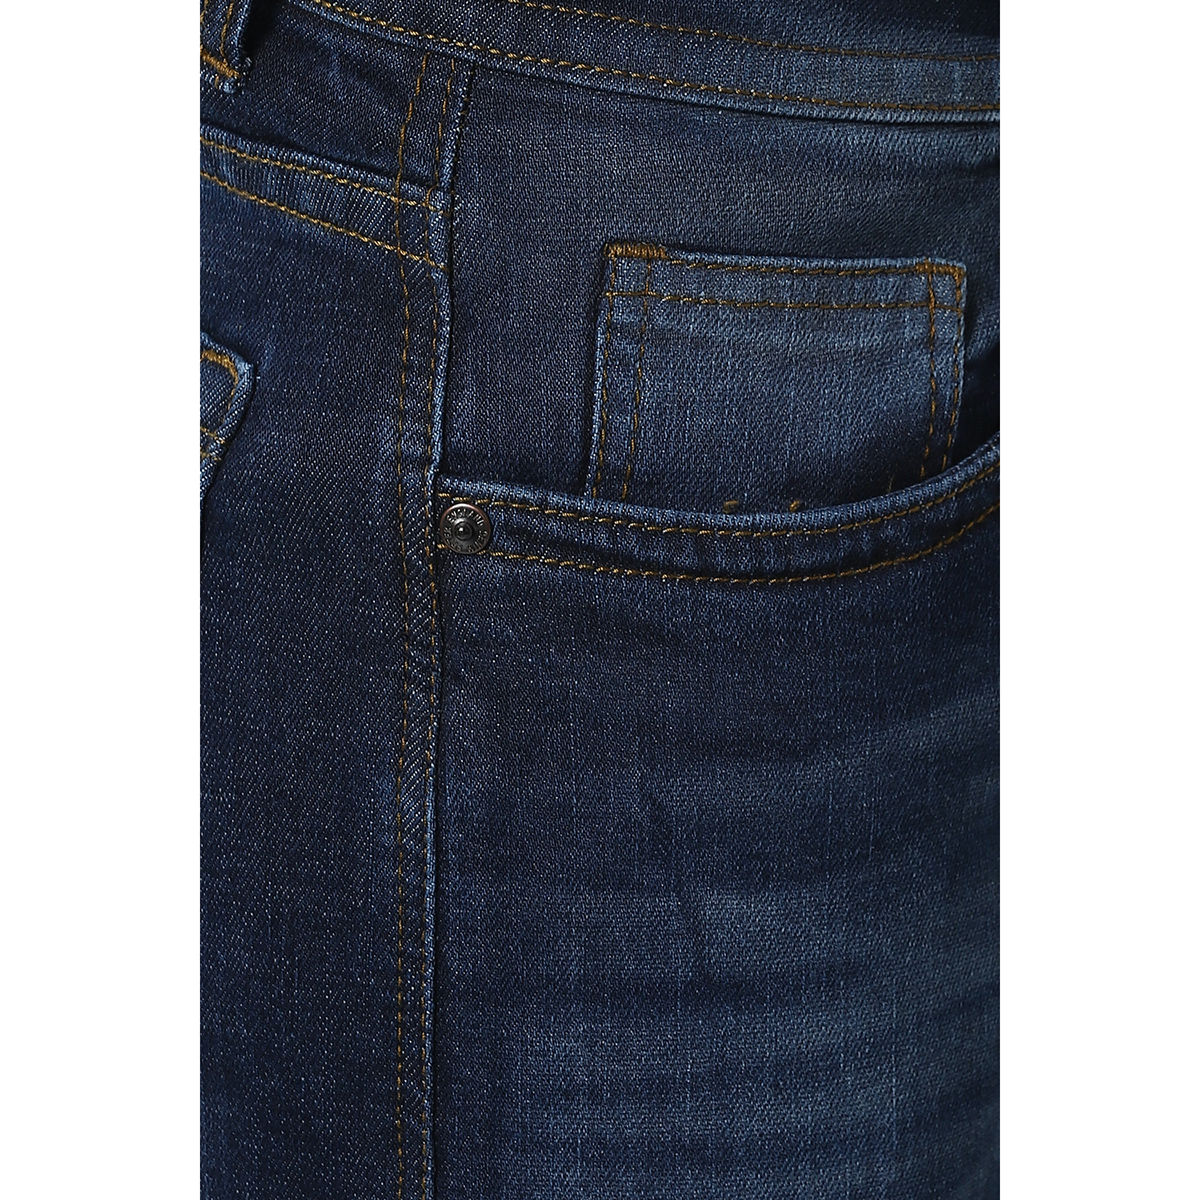 Peter England Jeans | Buy Peter England Jeans Online in India at Best Price